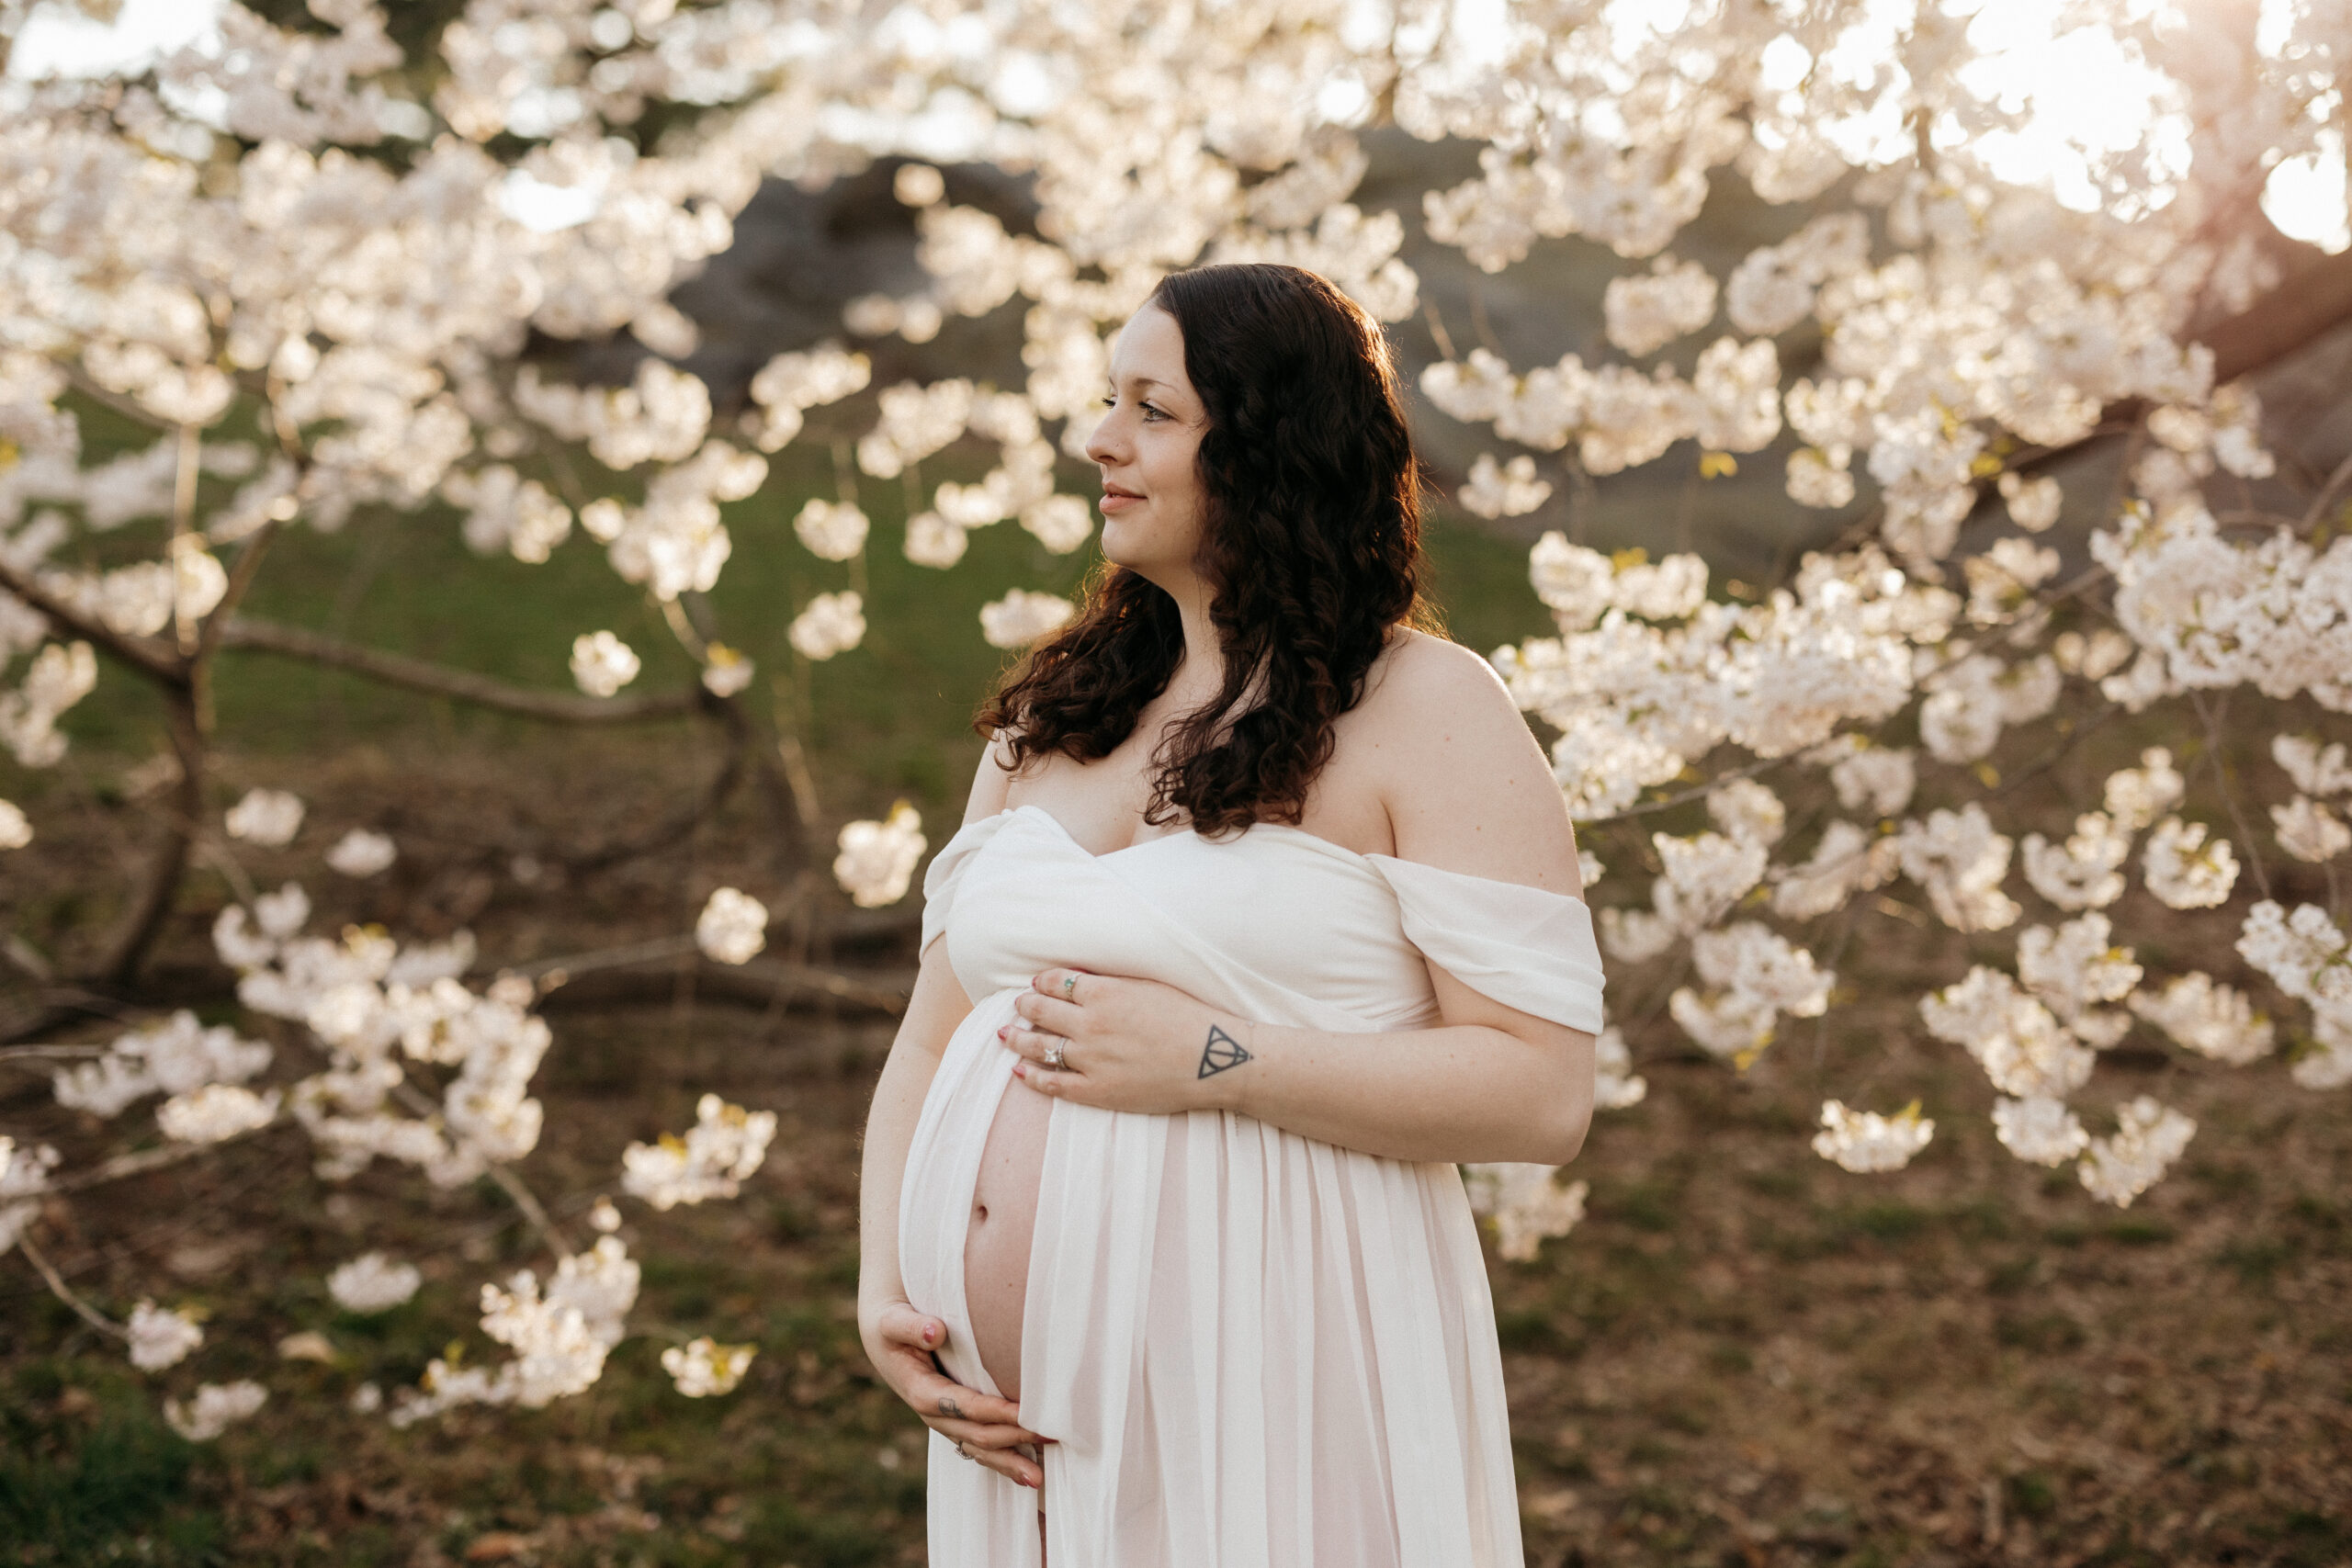 Pregnant mom standing in front of a cherry blossom tree, sun light shining in between the branches. Mom is wearing a flowing white dress, has her hands on her pregnant belly, and looking out into the park.